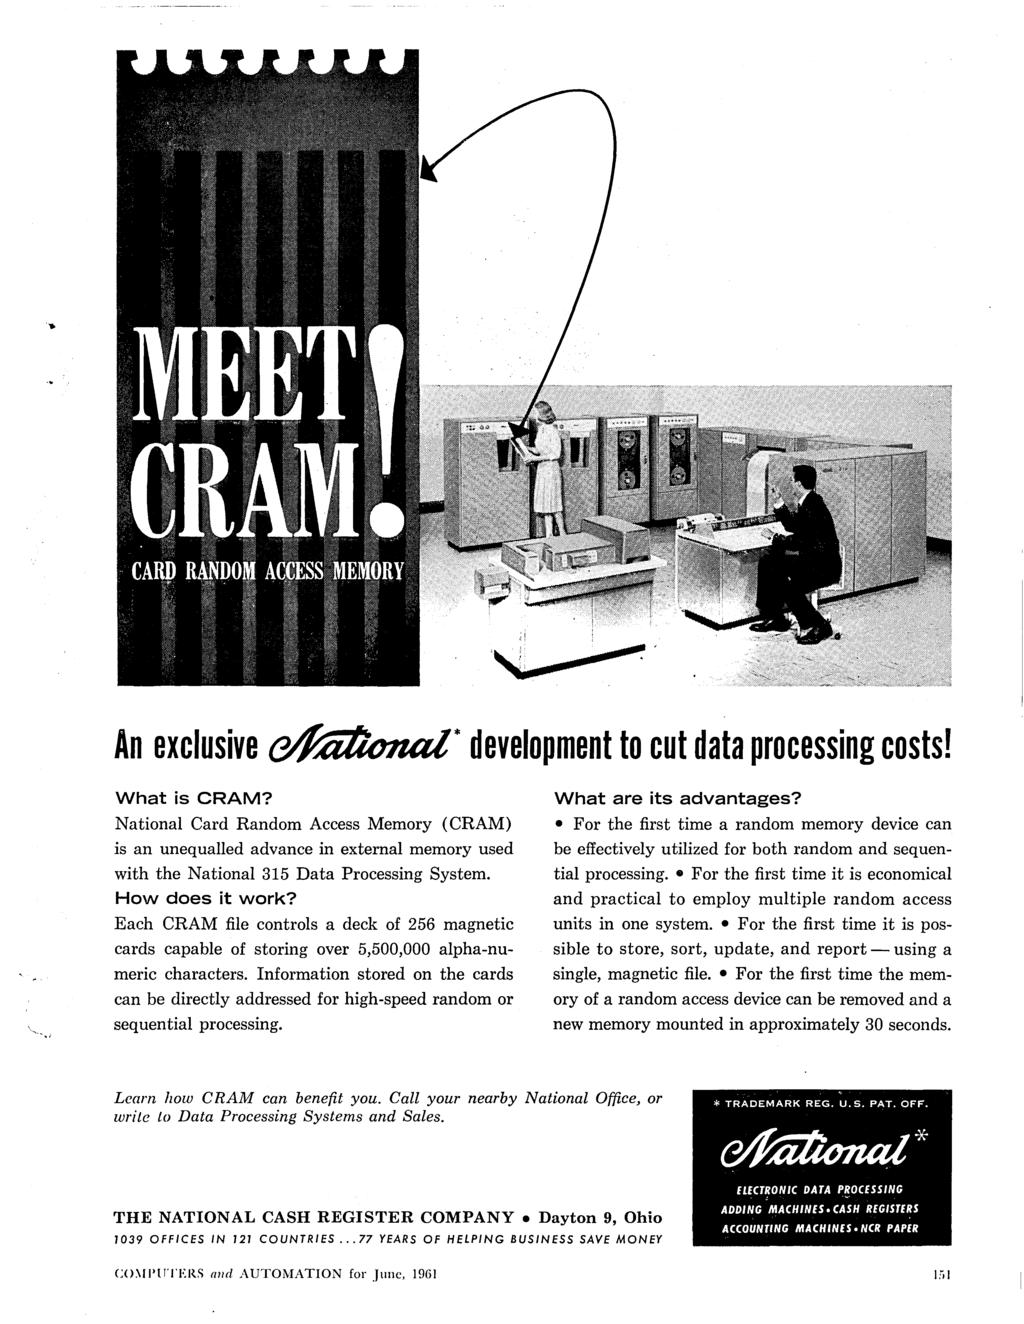 ... An exclusive (!/f;i;t;cnal* development to cut data processing costs! What is CRAM?